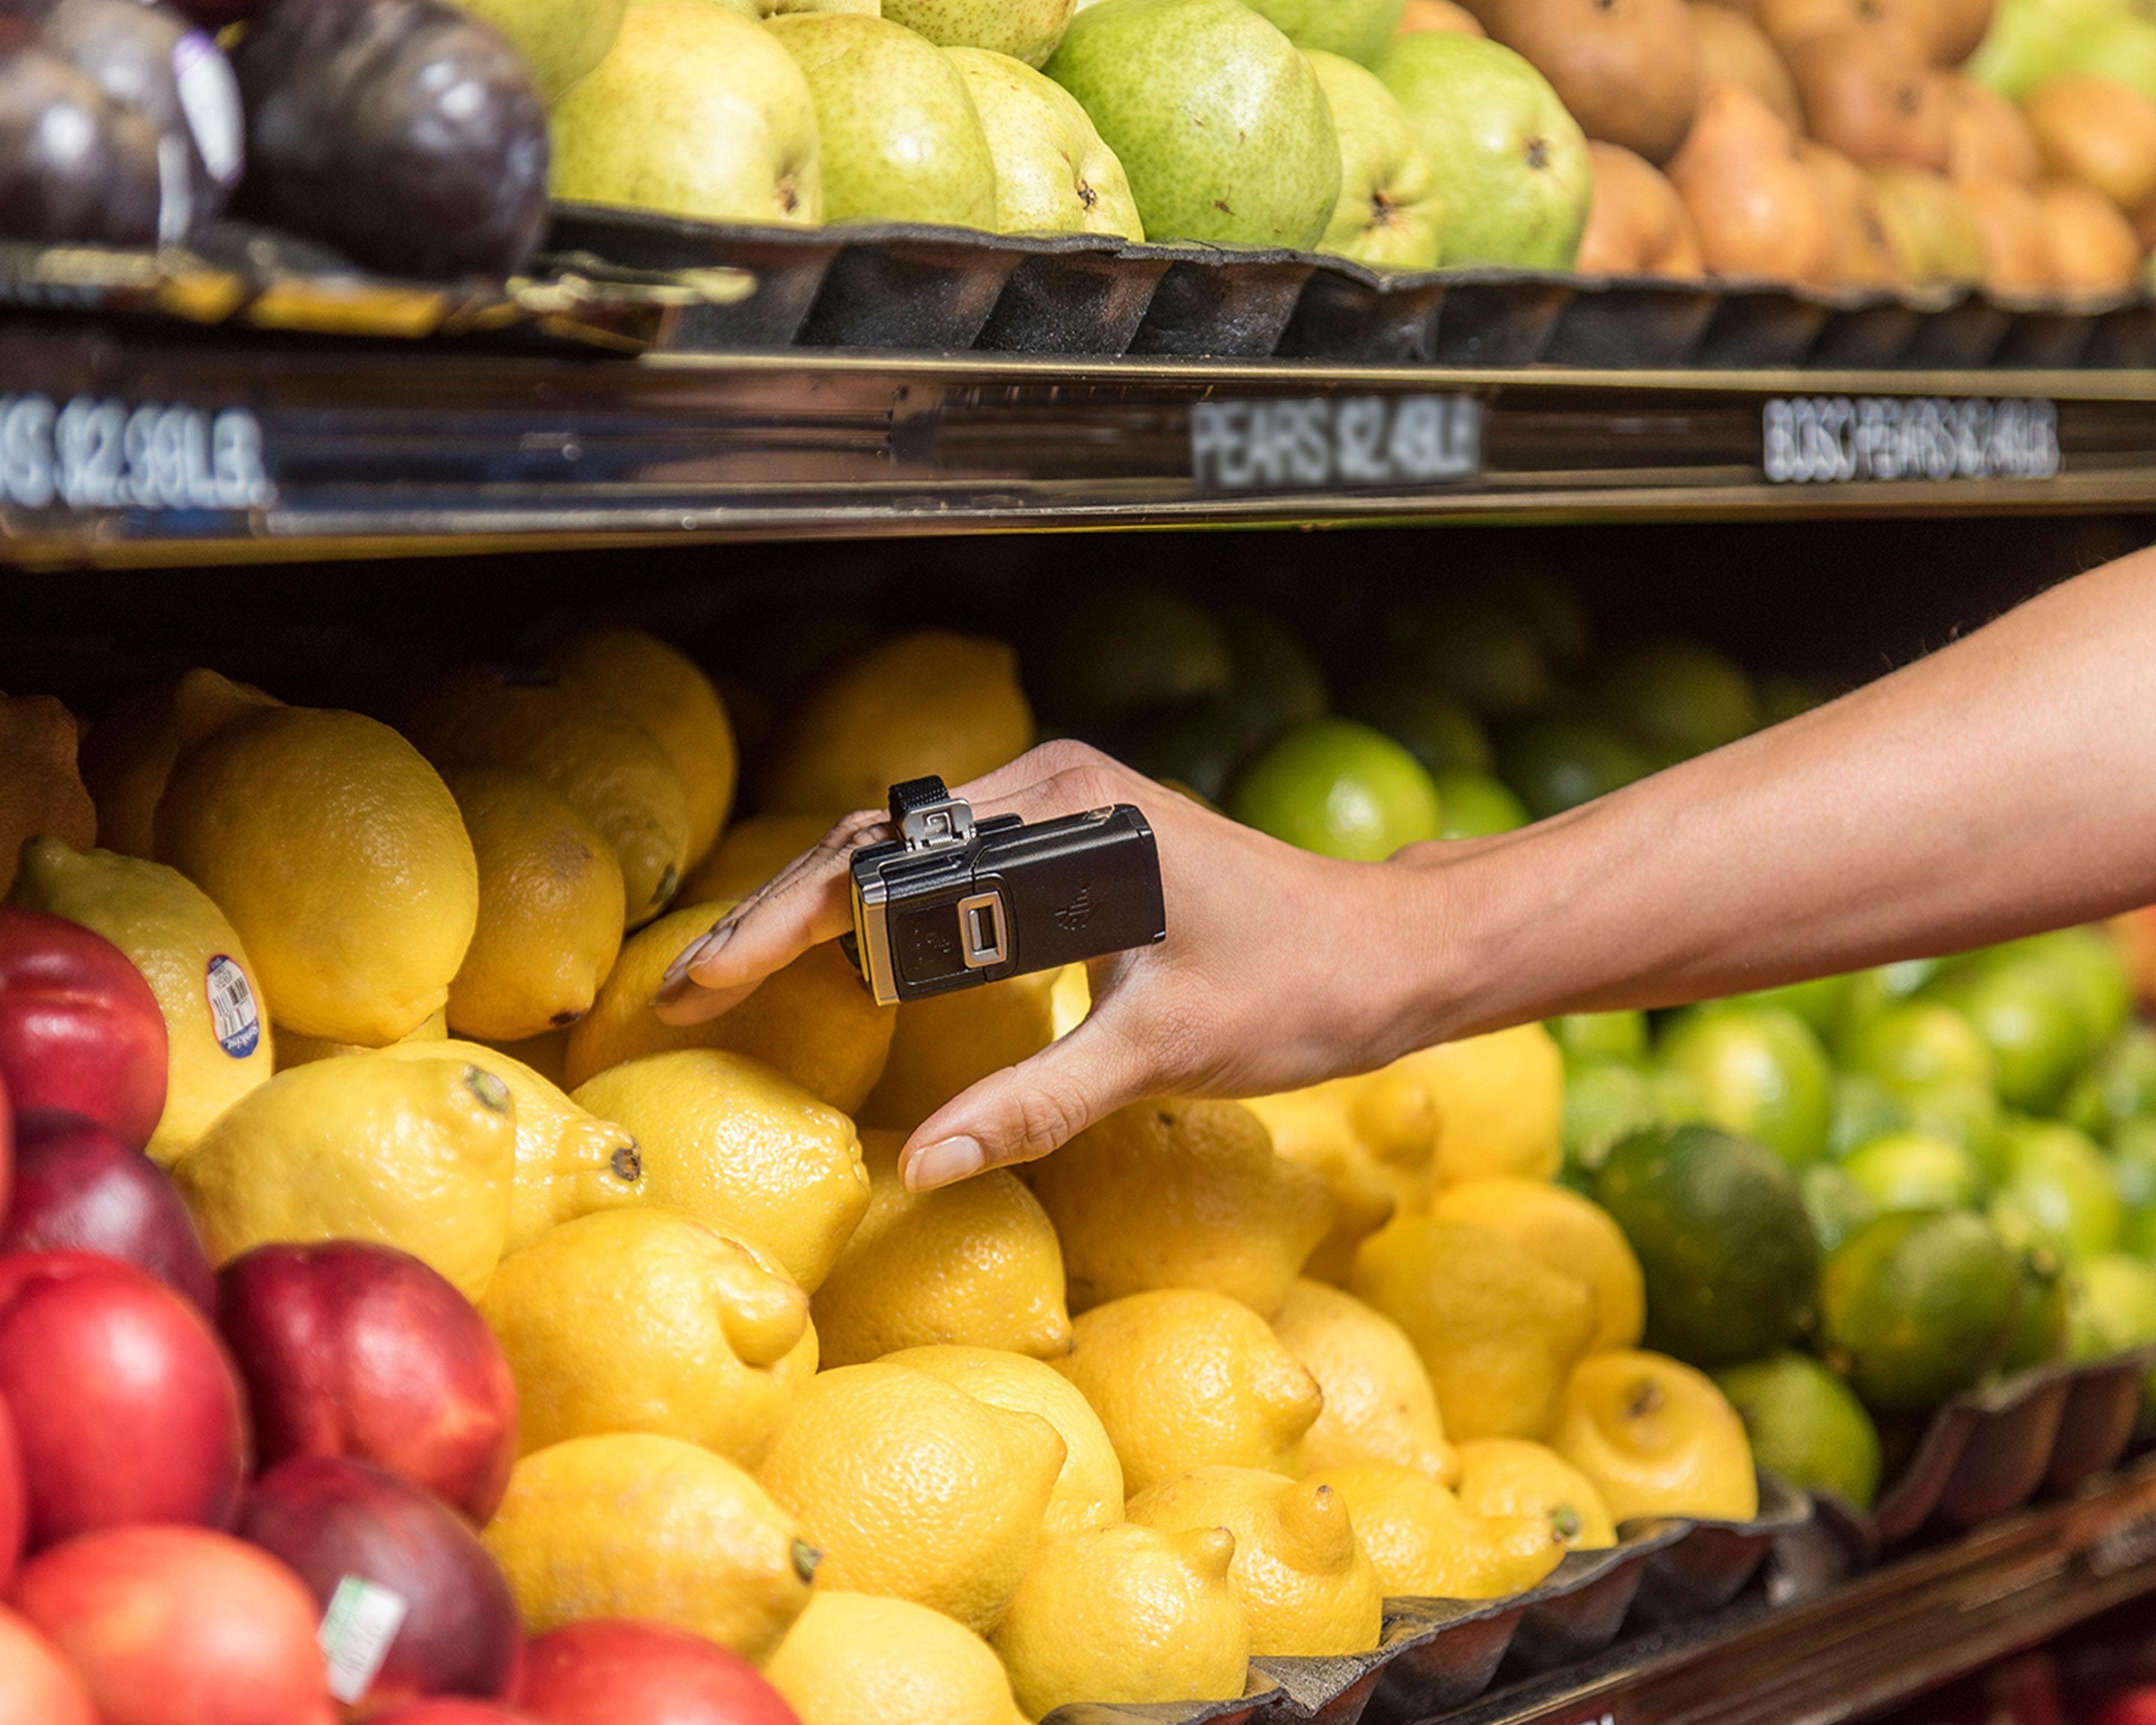 Grocery store worker wears Zebra RS5100 wireless Bluetooth barcode scanner on her index finger as she collects a lemon